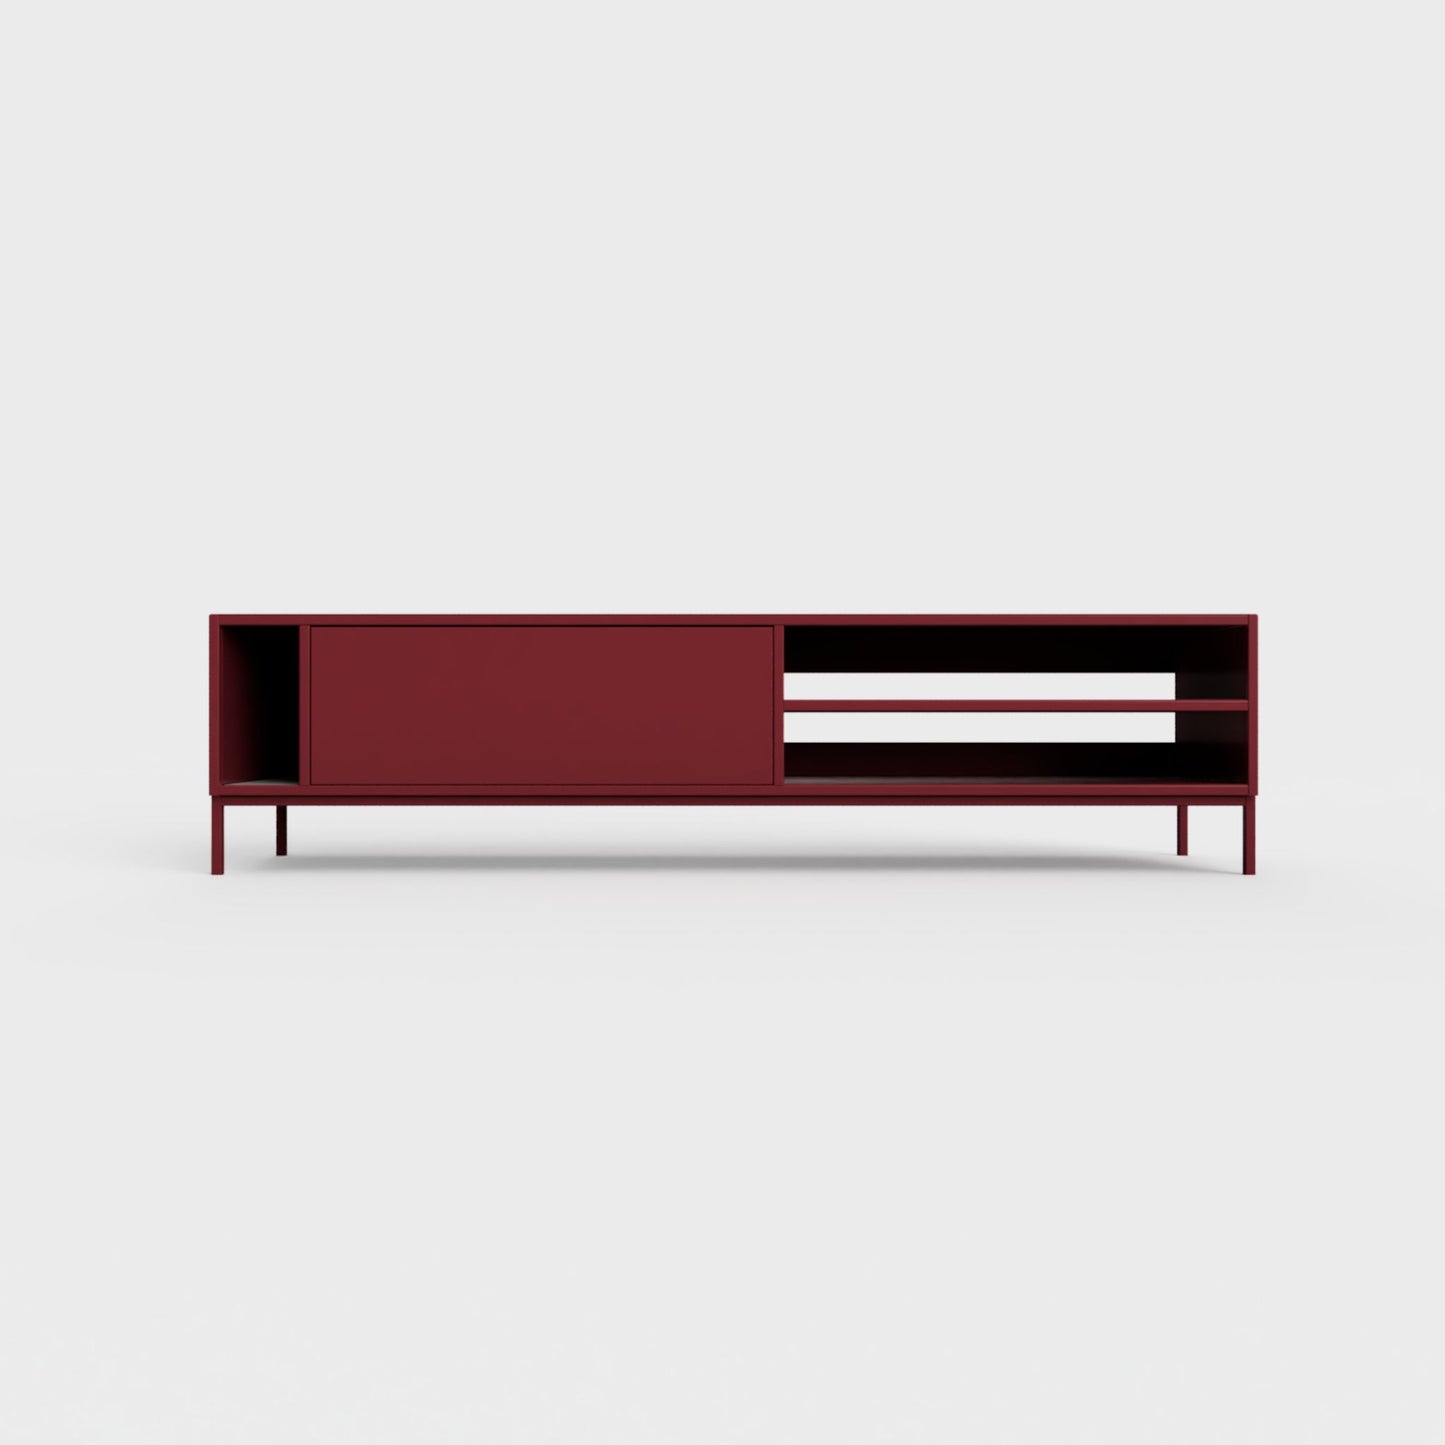 Prunus 03 Lowboard in ruby red color, powder-coated steel, elegant and modern piece of furniture for your living room